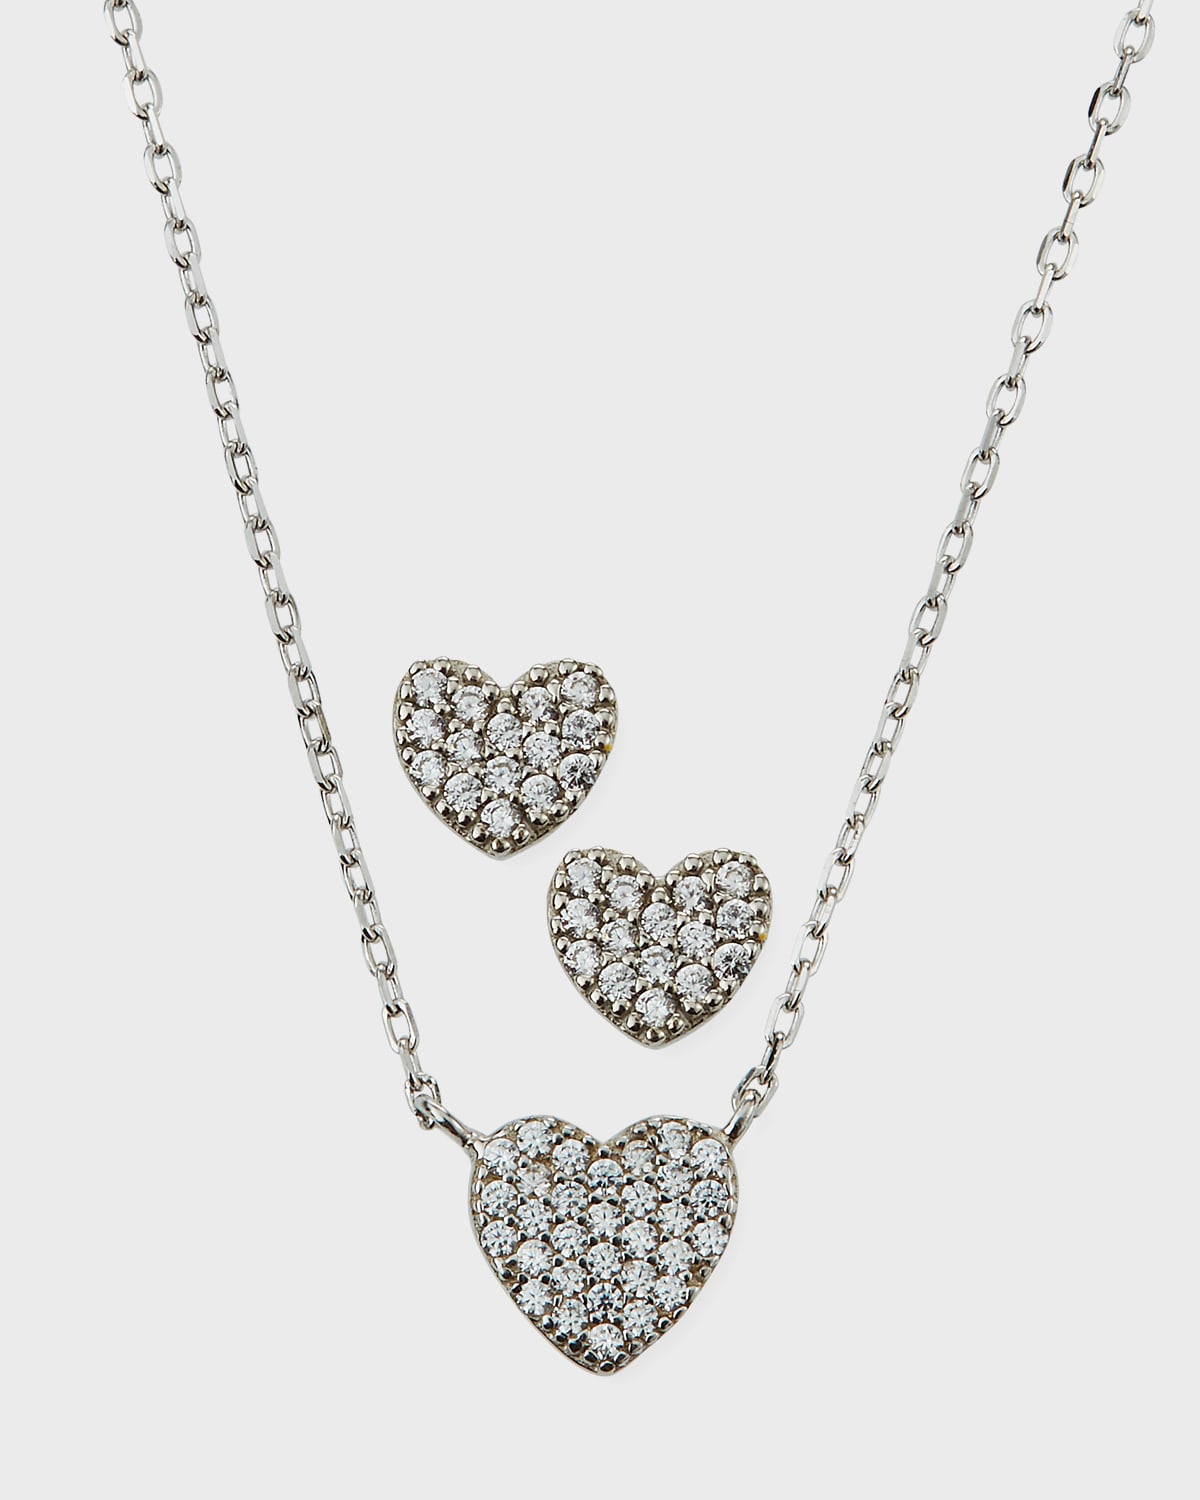 Helena Girl's Pave Heart Necklace w/ Matching Stud Earrings Set